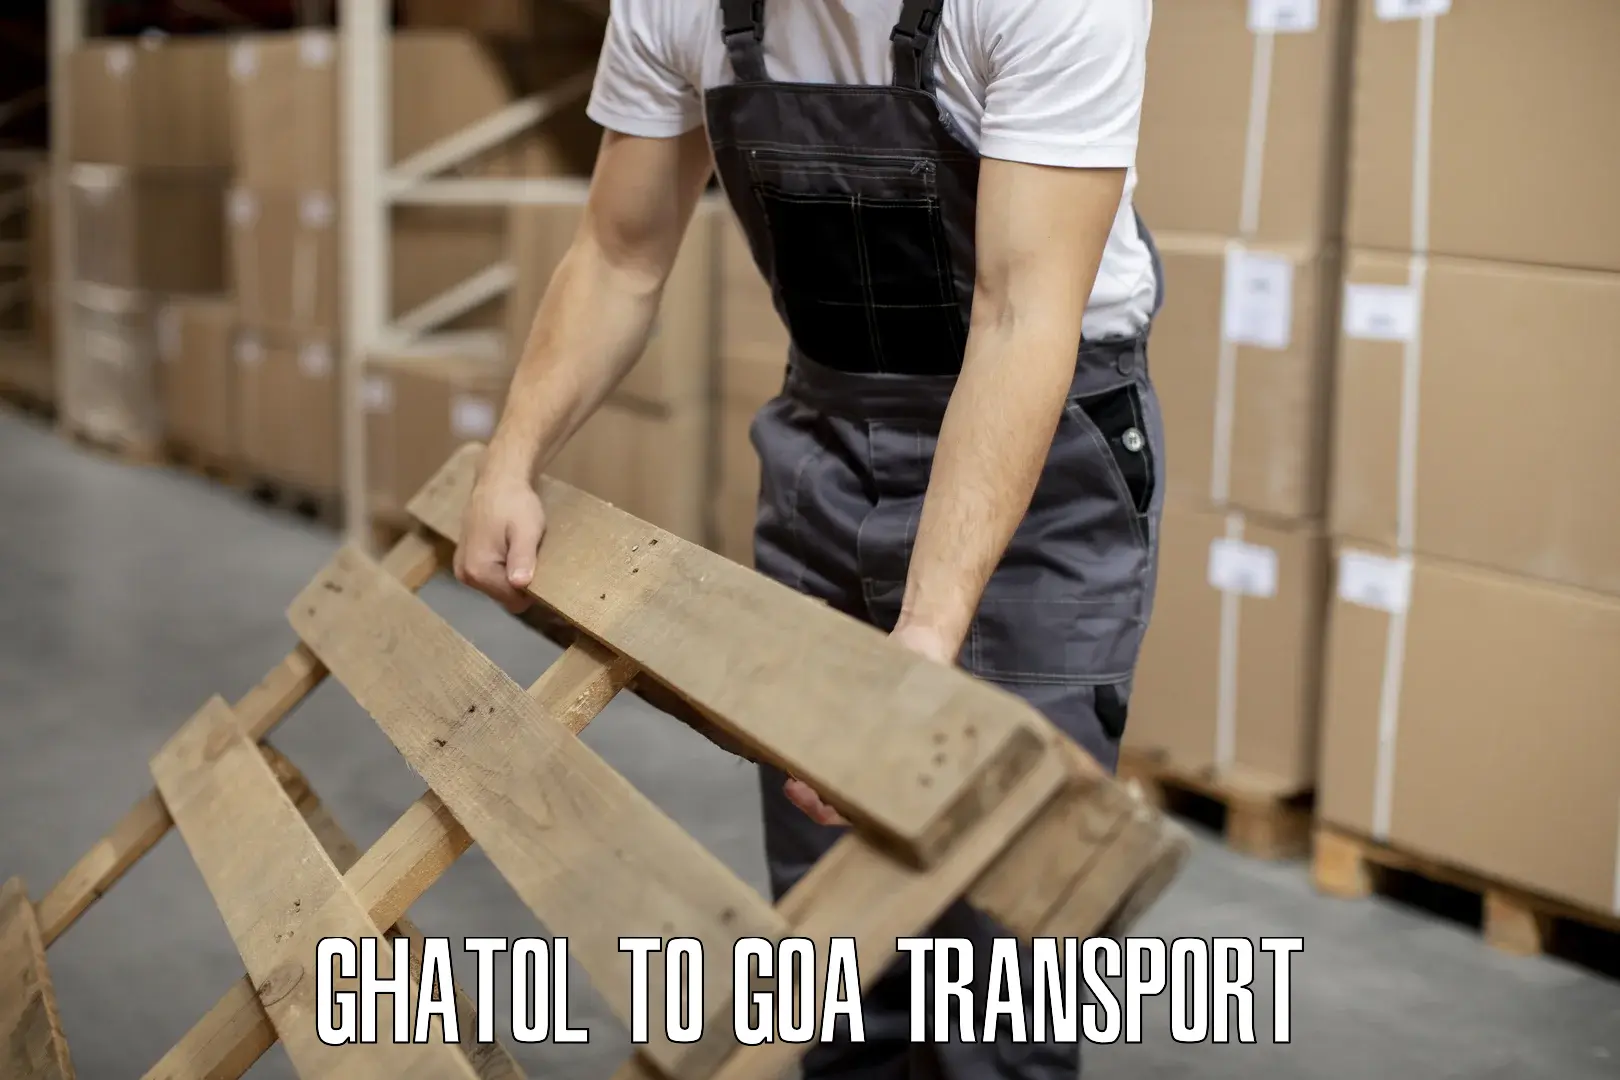 Scooty transport charges Ghatol to Goa University